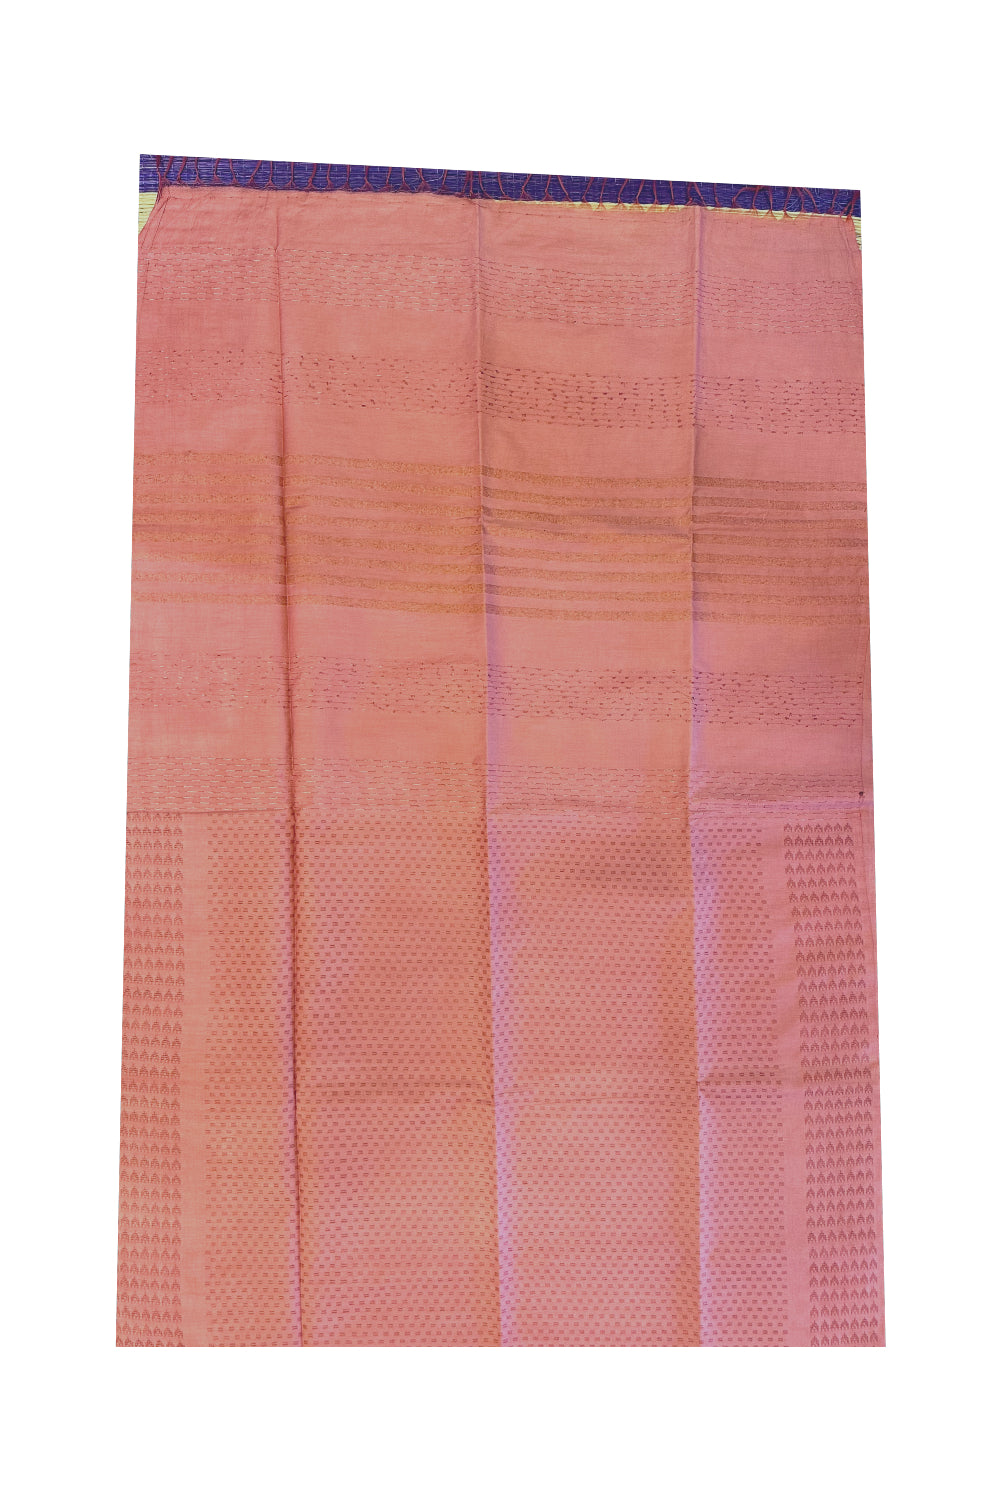 Southloom Pure Tussar Saree with Plain Body and Blouse Piece in Pinkish Shade